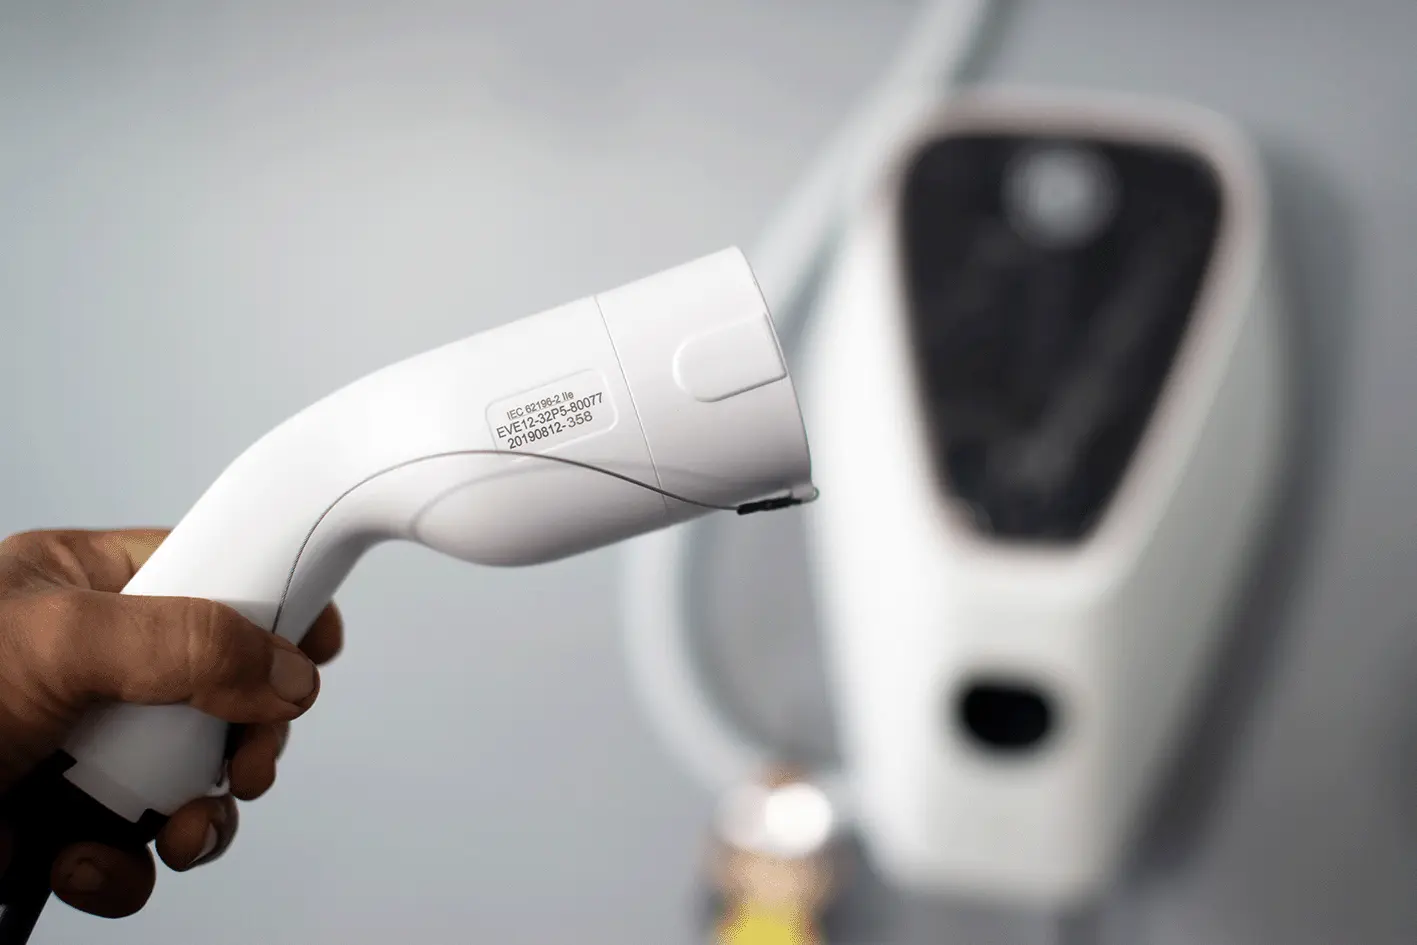 A hand holding a white electric vehicle charging plug in front of a charging point